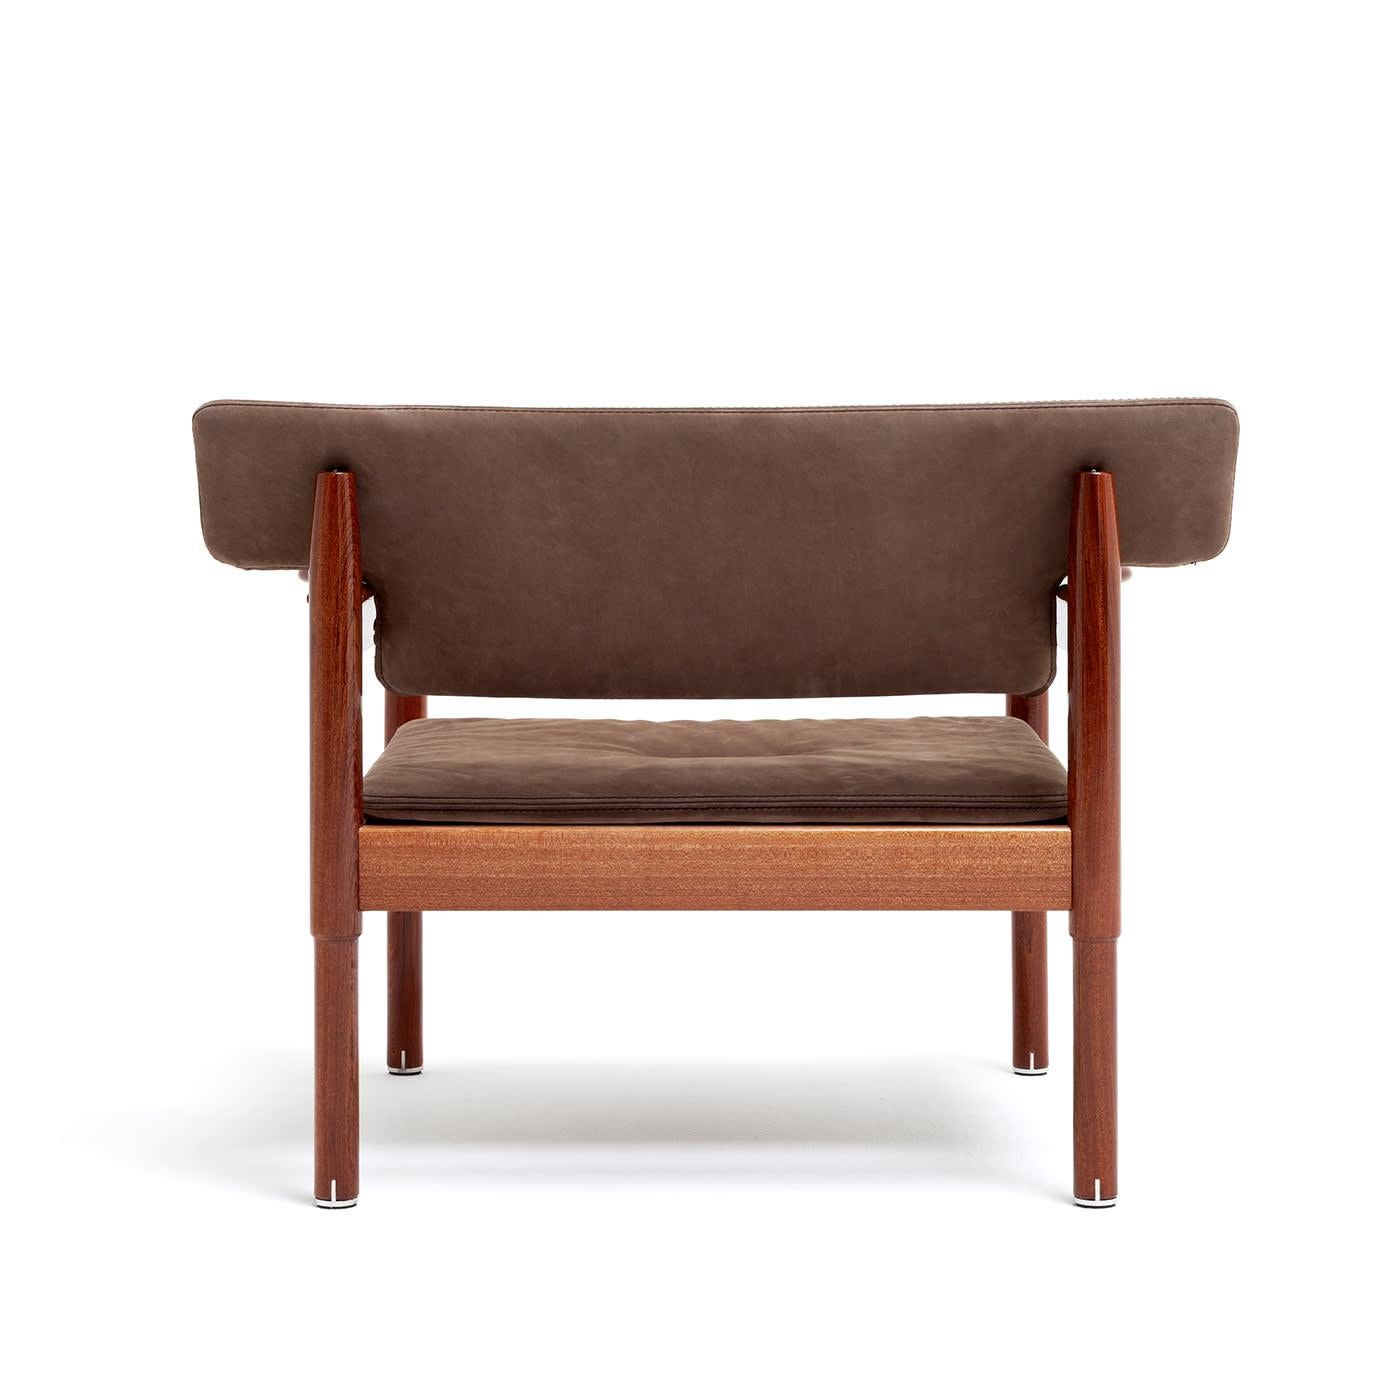 Hand-Crafted Vieste Slim Brown Armchair by Massimo Castagna